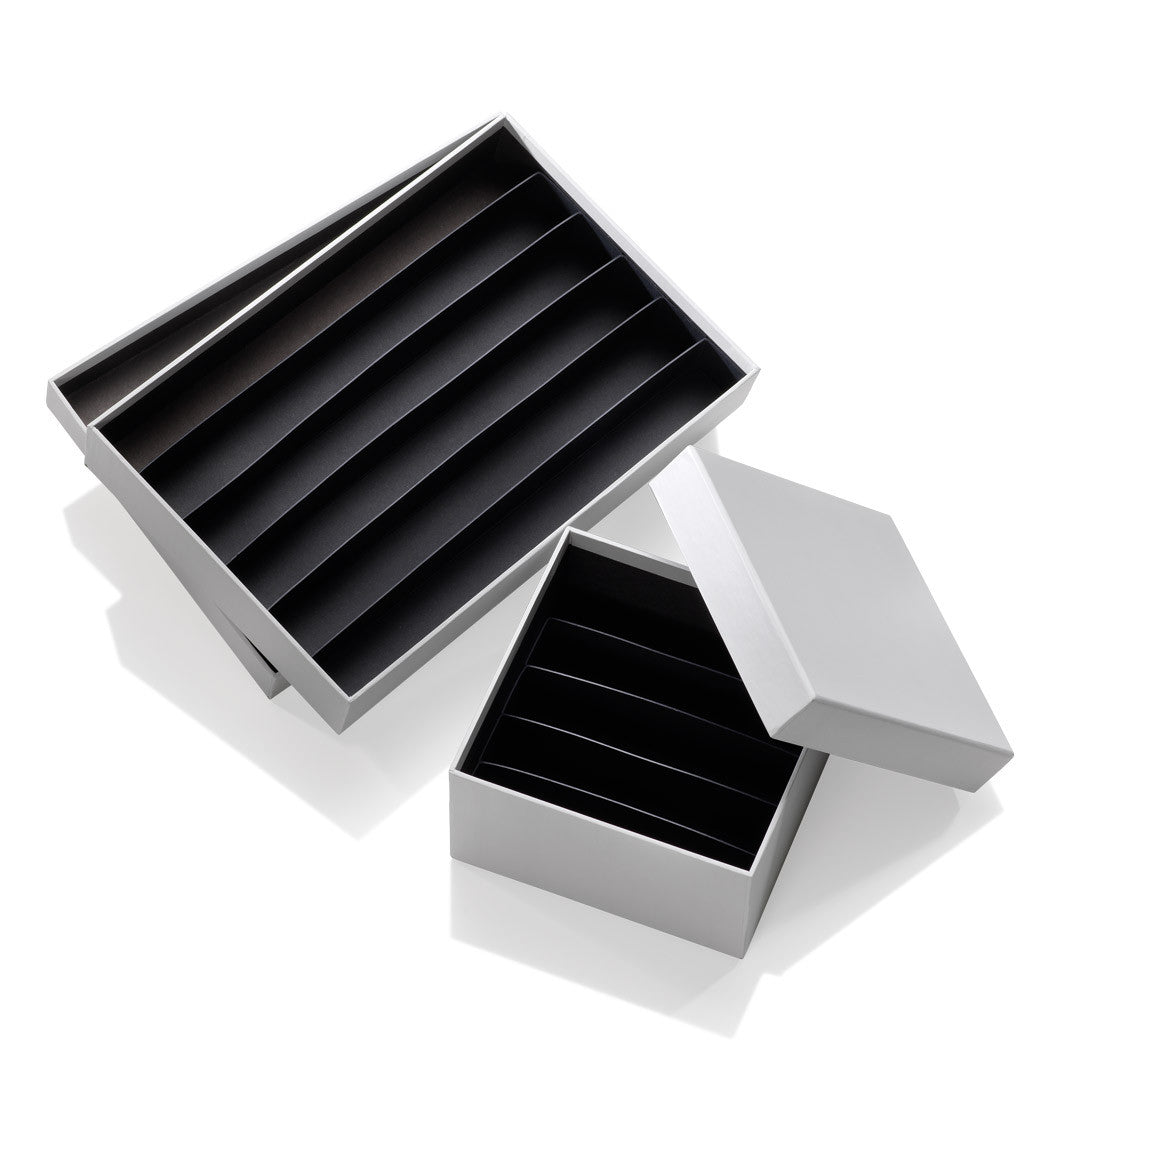 Trajan Microscope Slide and Cassette Storage Boxes